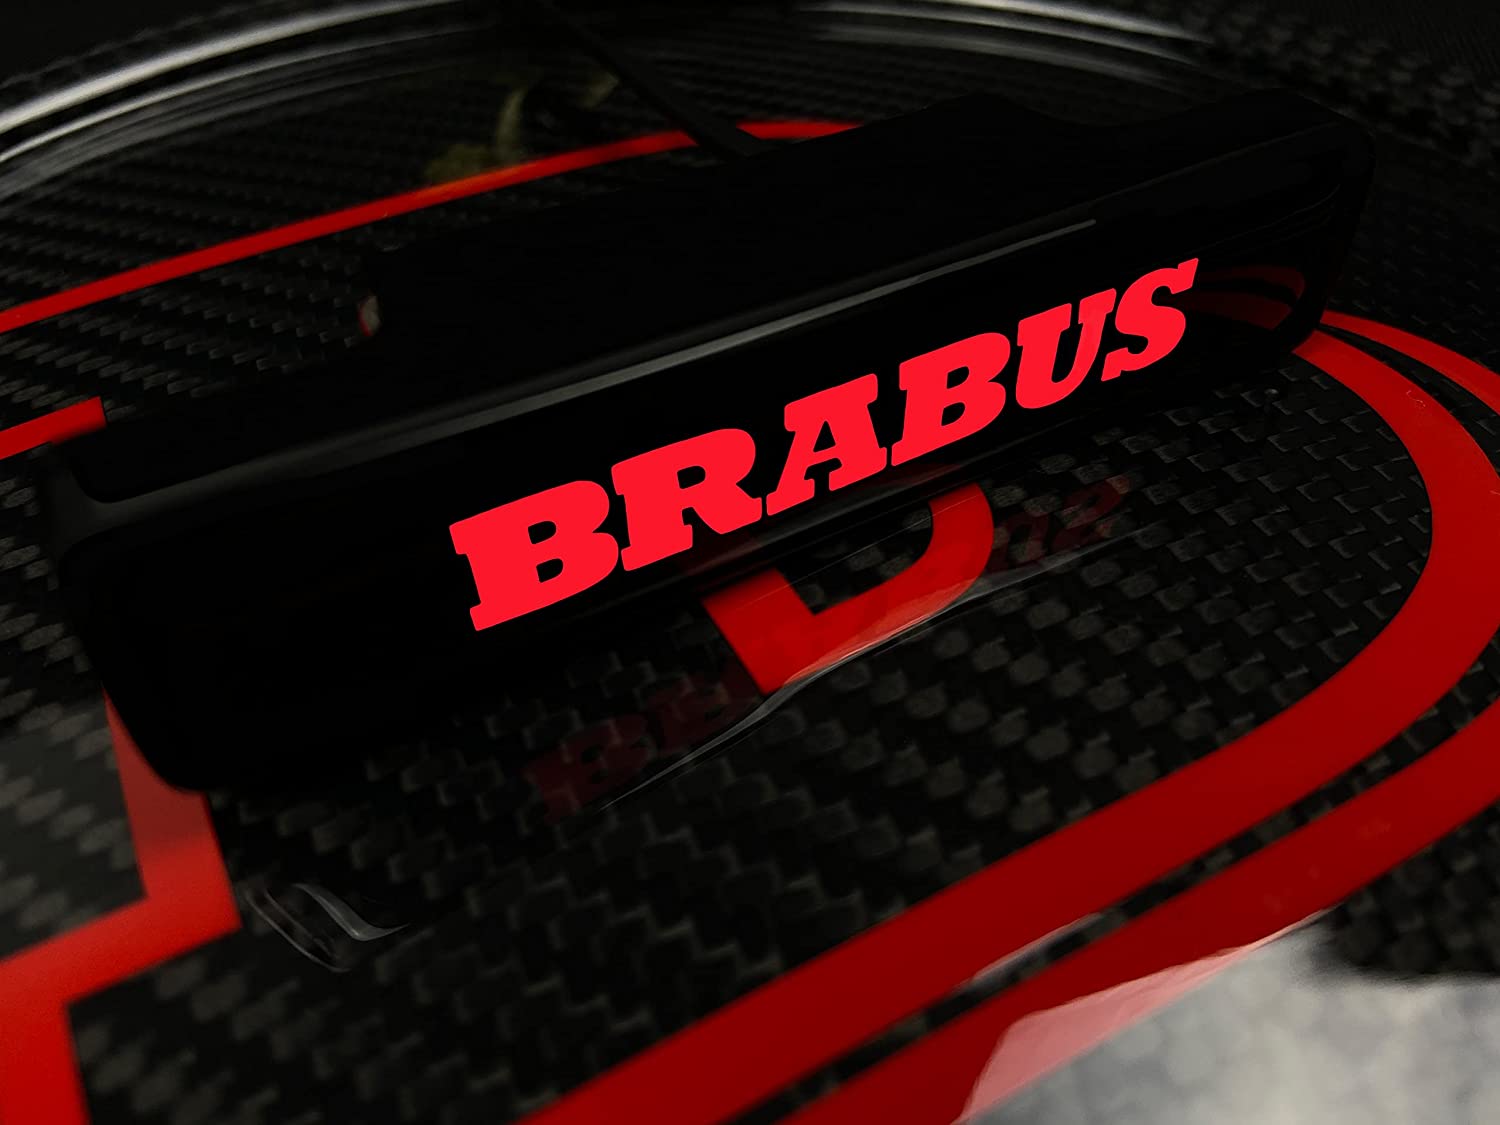 Brabus style Front Grille Red LED Illuminated Logo Badge Emblem for Mercedes Benz G-Wagon G-Class W463 W463A W464